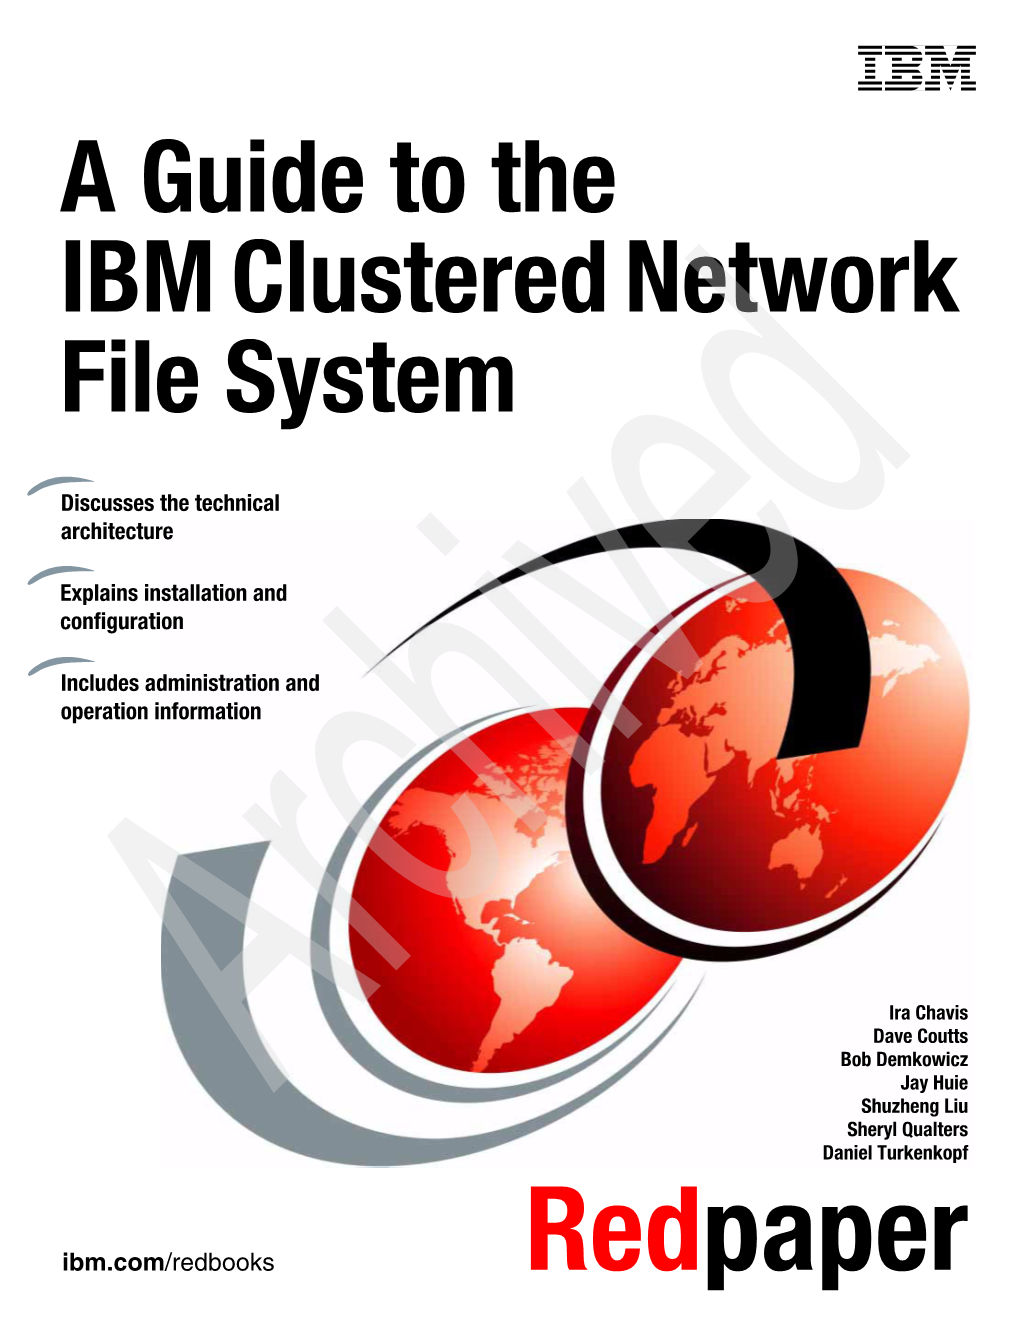 A Guide to the IBM Clustered Network File System